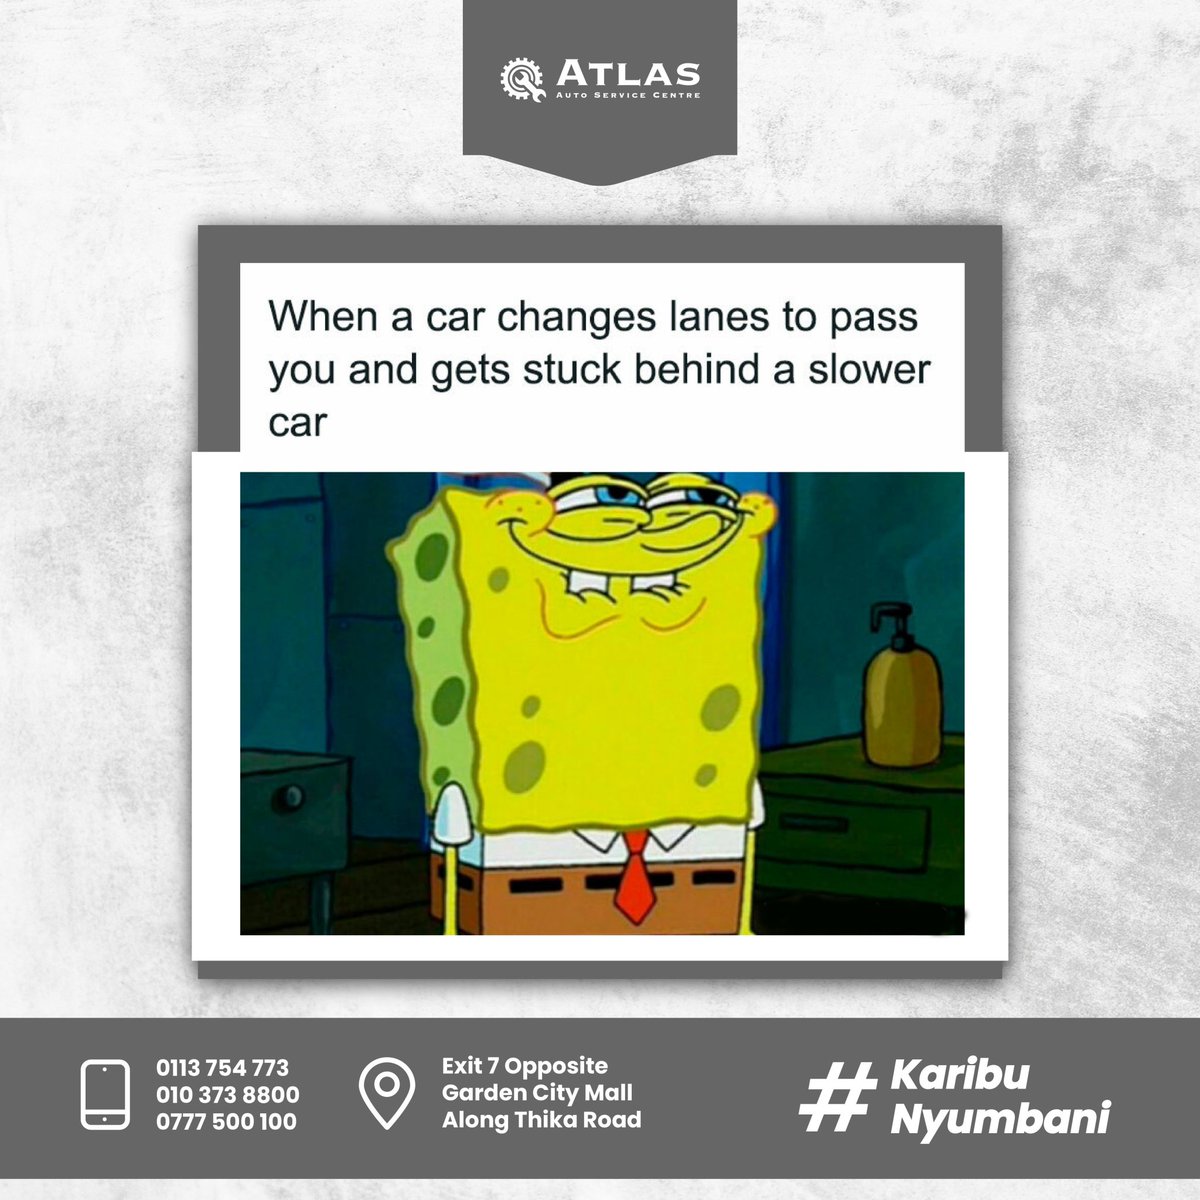 😂😂 You know that feeling. #happyweek #getyourcarserviced! 

We remain as your only  trustworthy car service patner. Visit us opposite Garden City.

#carservicing #carmaintenancetips #atlasautoservicecentre #congratulationsgovernors #34As #electionke2022